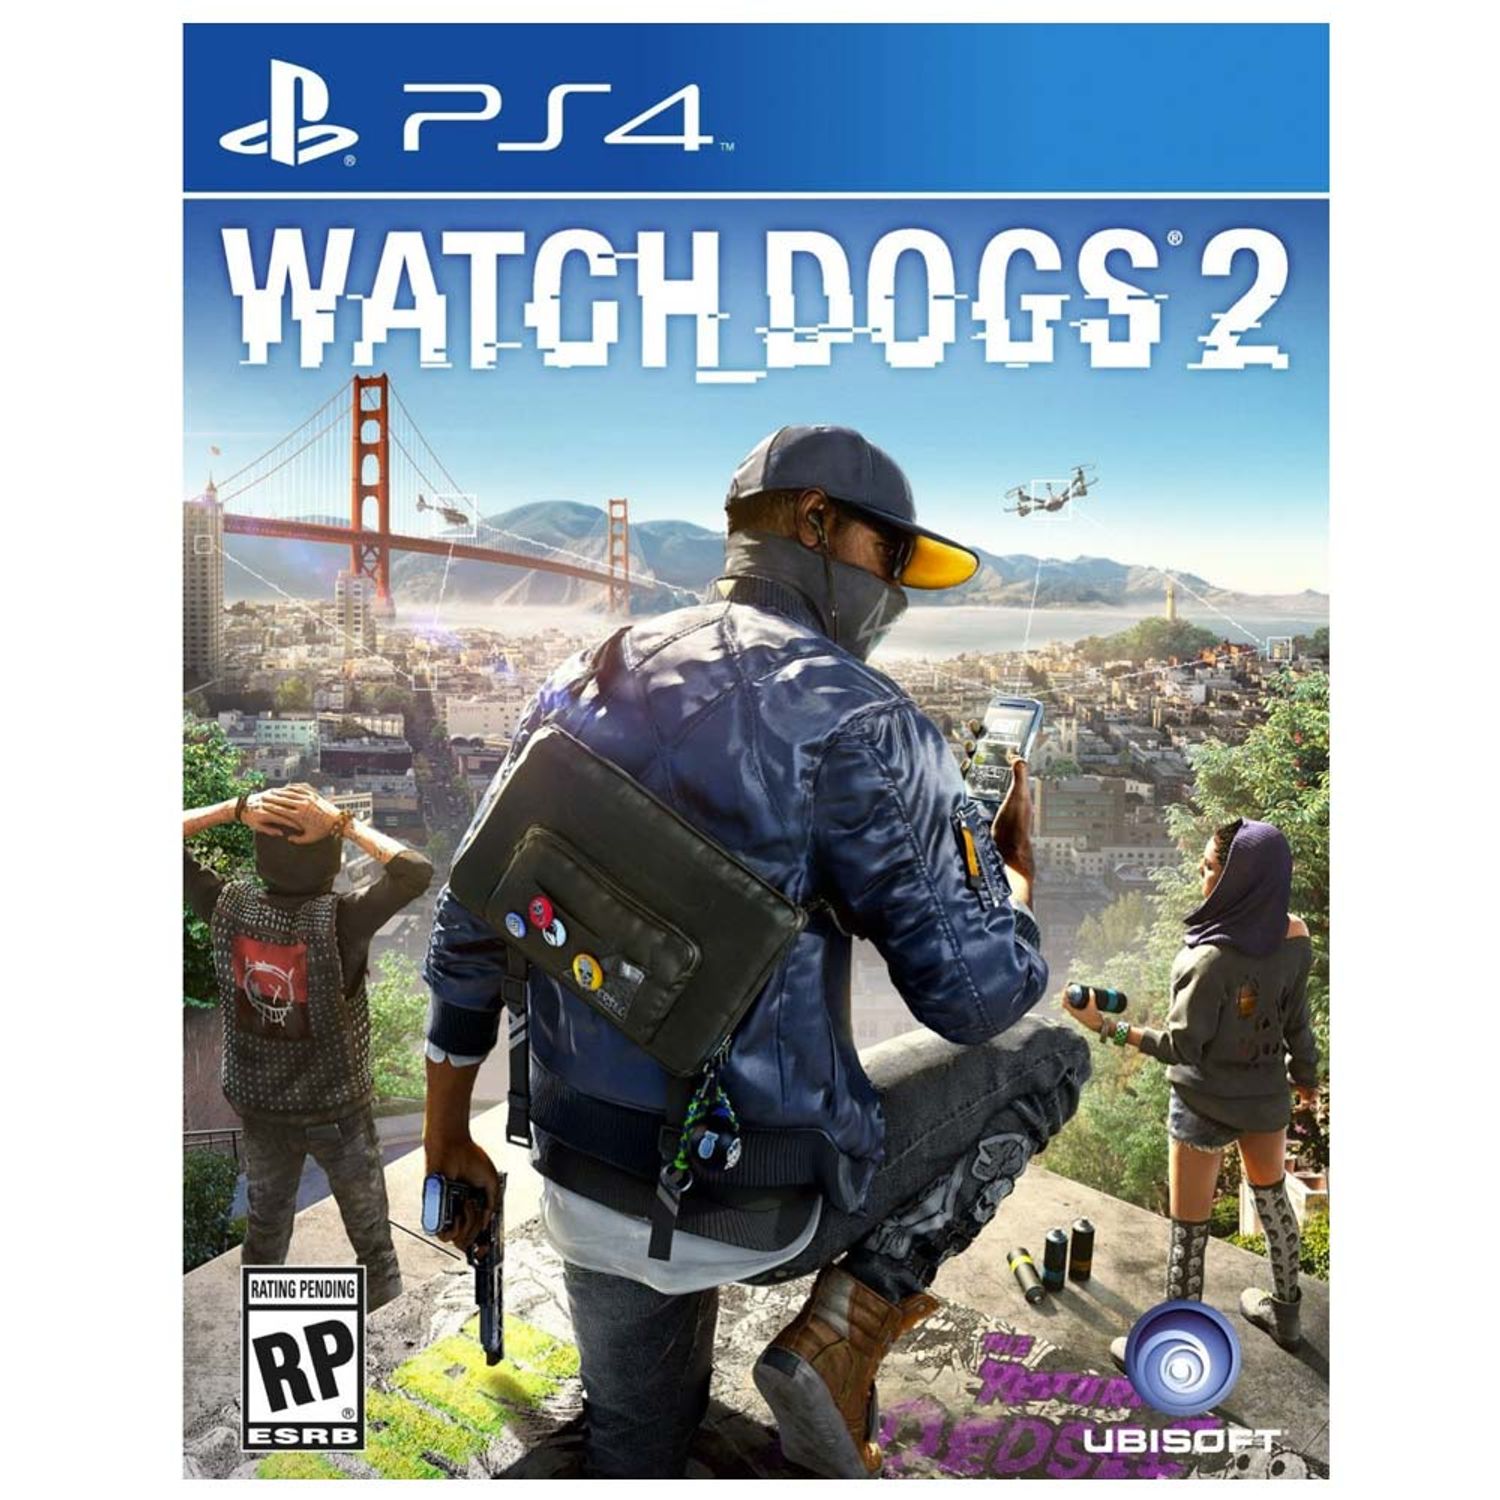 ps4 watch dogs 2 bundle